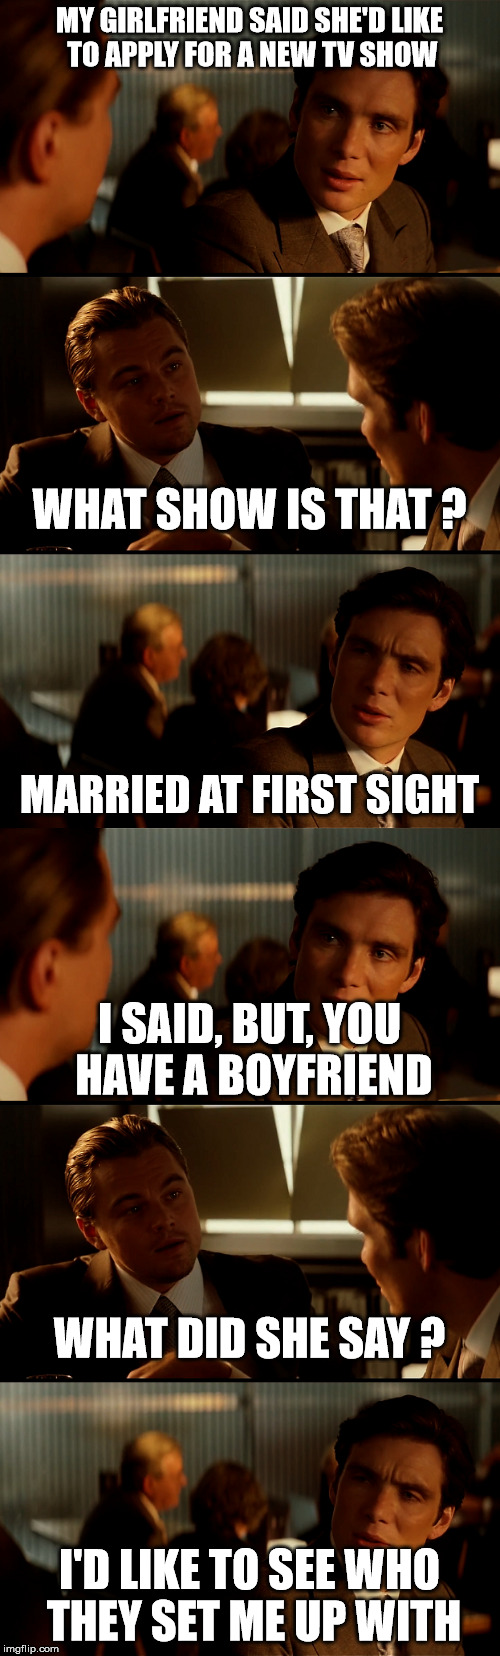 married at first sight | MY GIRLFRIEND SAID SHE'D LIKE TO APPLY FOR A NEW TV SHOW; WHAT SHOW IS THAT ? MARRIED AT FIRST SIGHT; I SAID, BUT, YOU HAVE A BOYFRIEND; WHAT DID SHE SAY ? I'D LIKE TO SEE WHO THEY SET ME UP WITH | image tagged in di caprio inception,true story,married | made w/ Imgflip meme maker